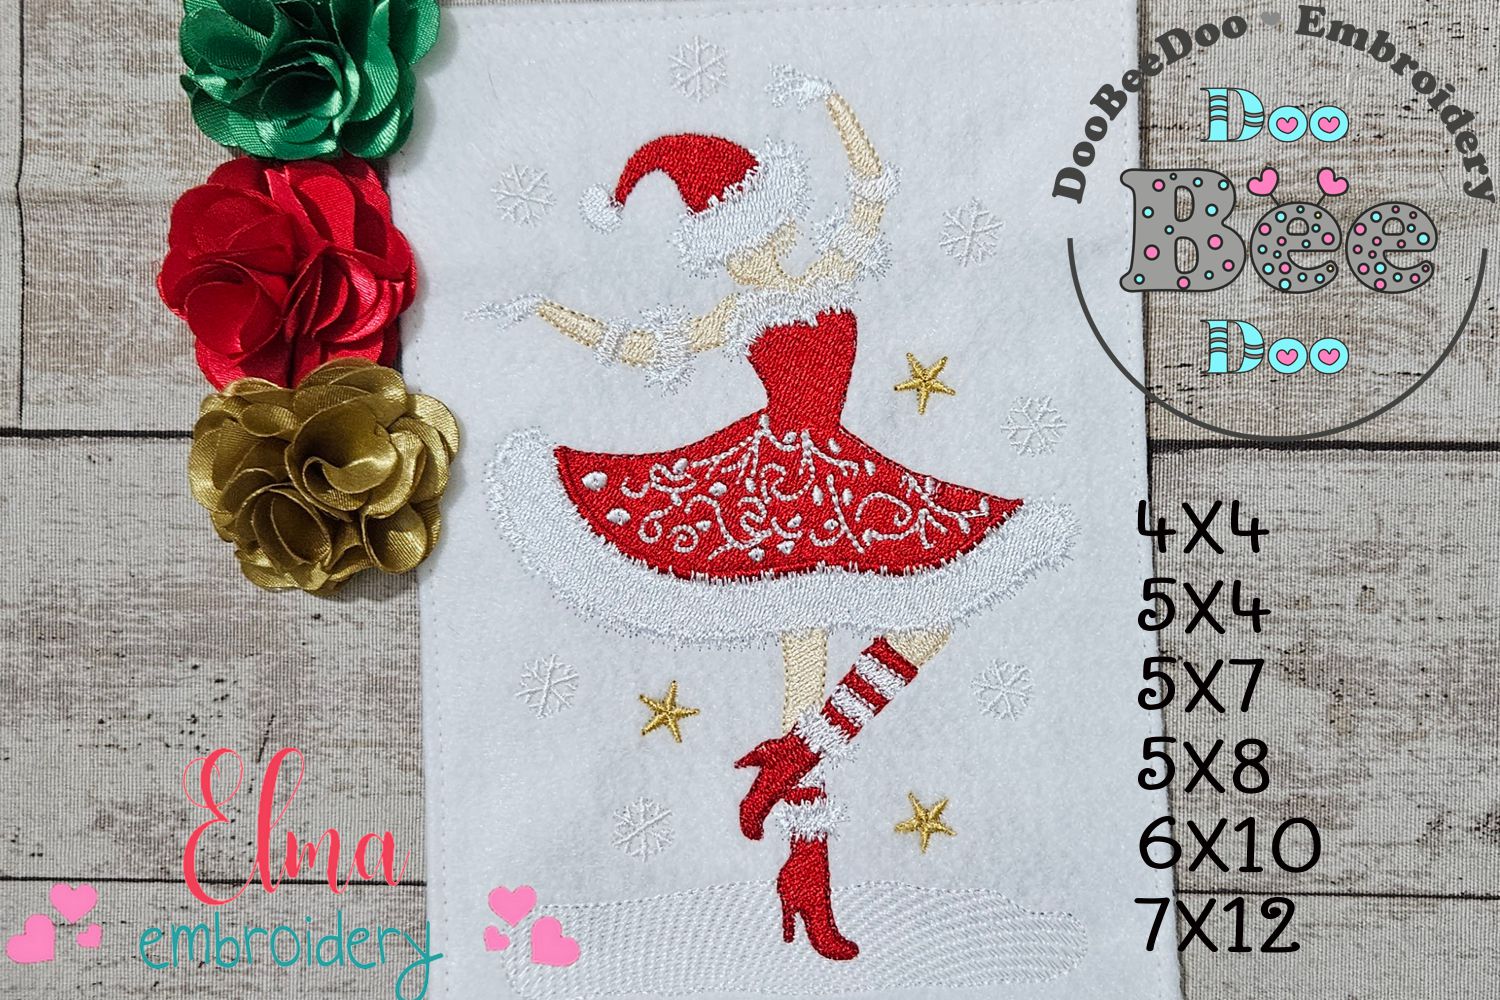 Embroidery Scissors - Christmas Prints - The Batty Lady